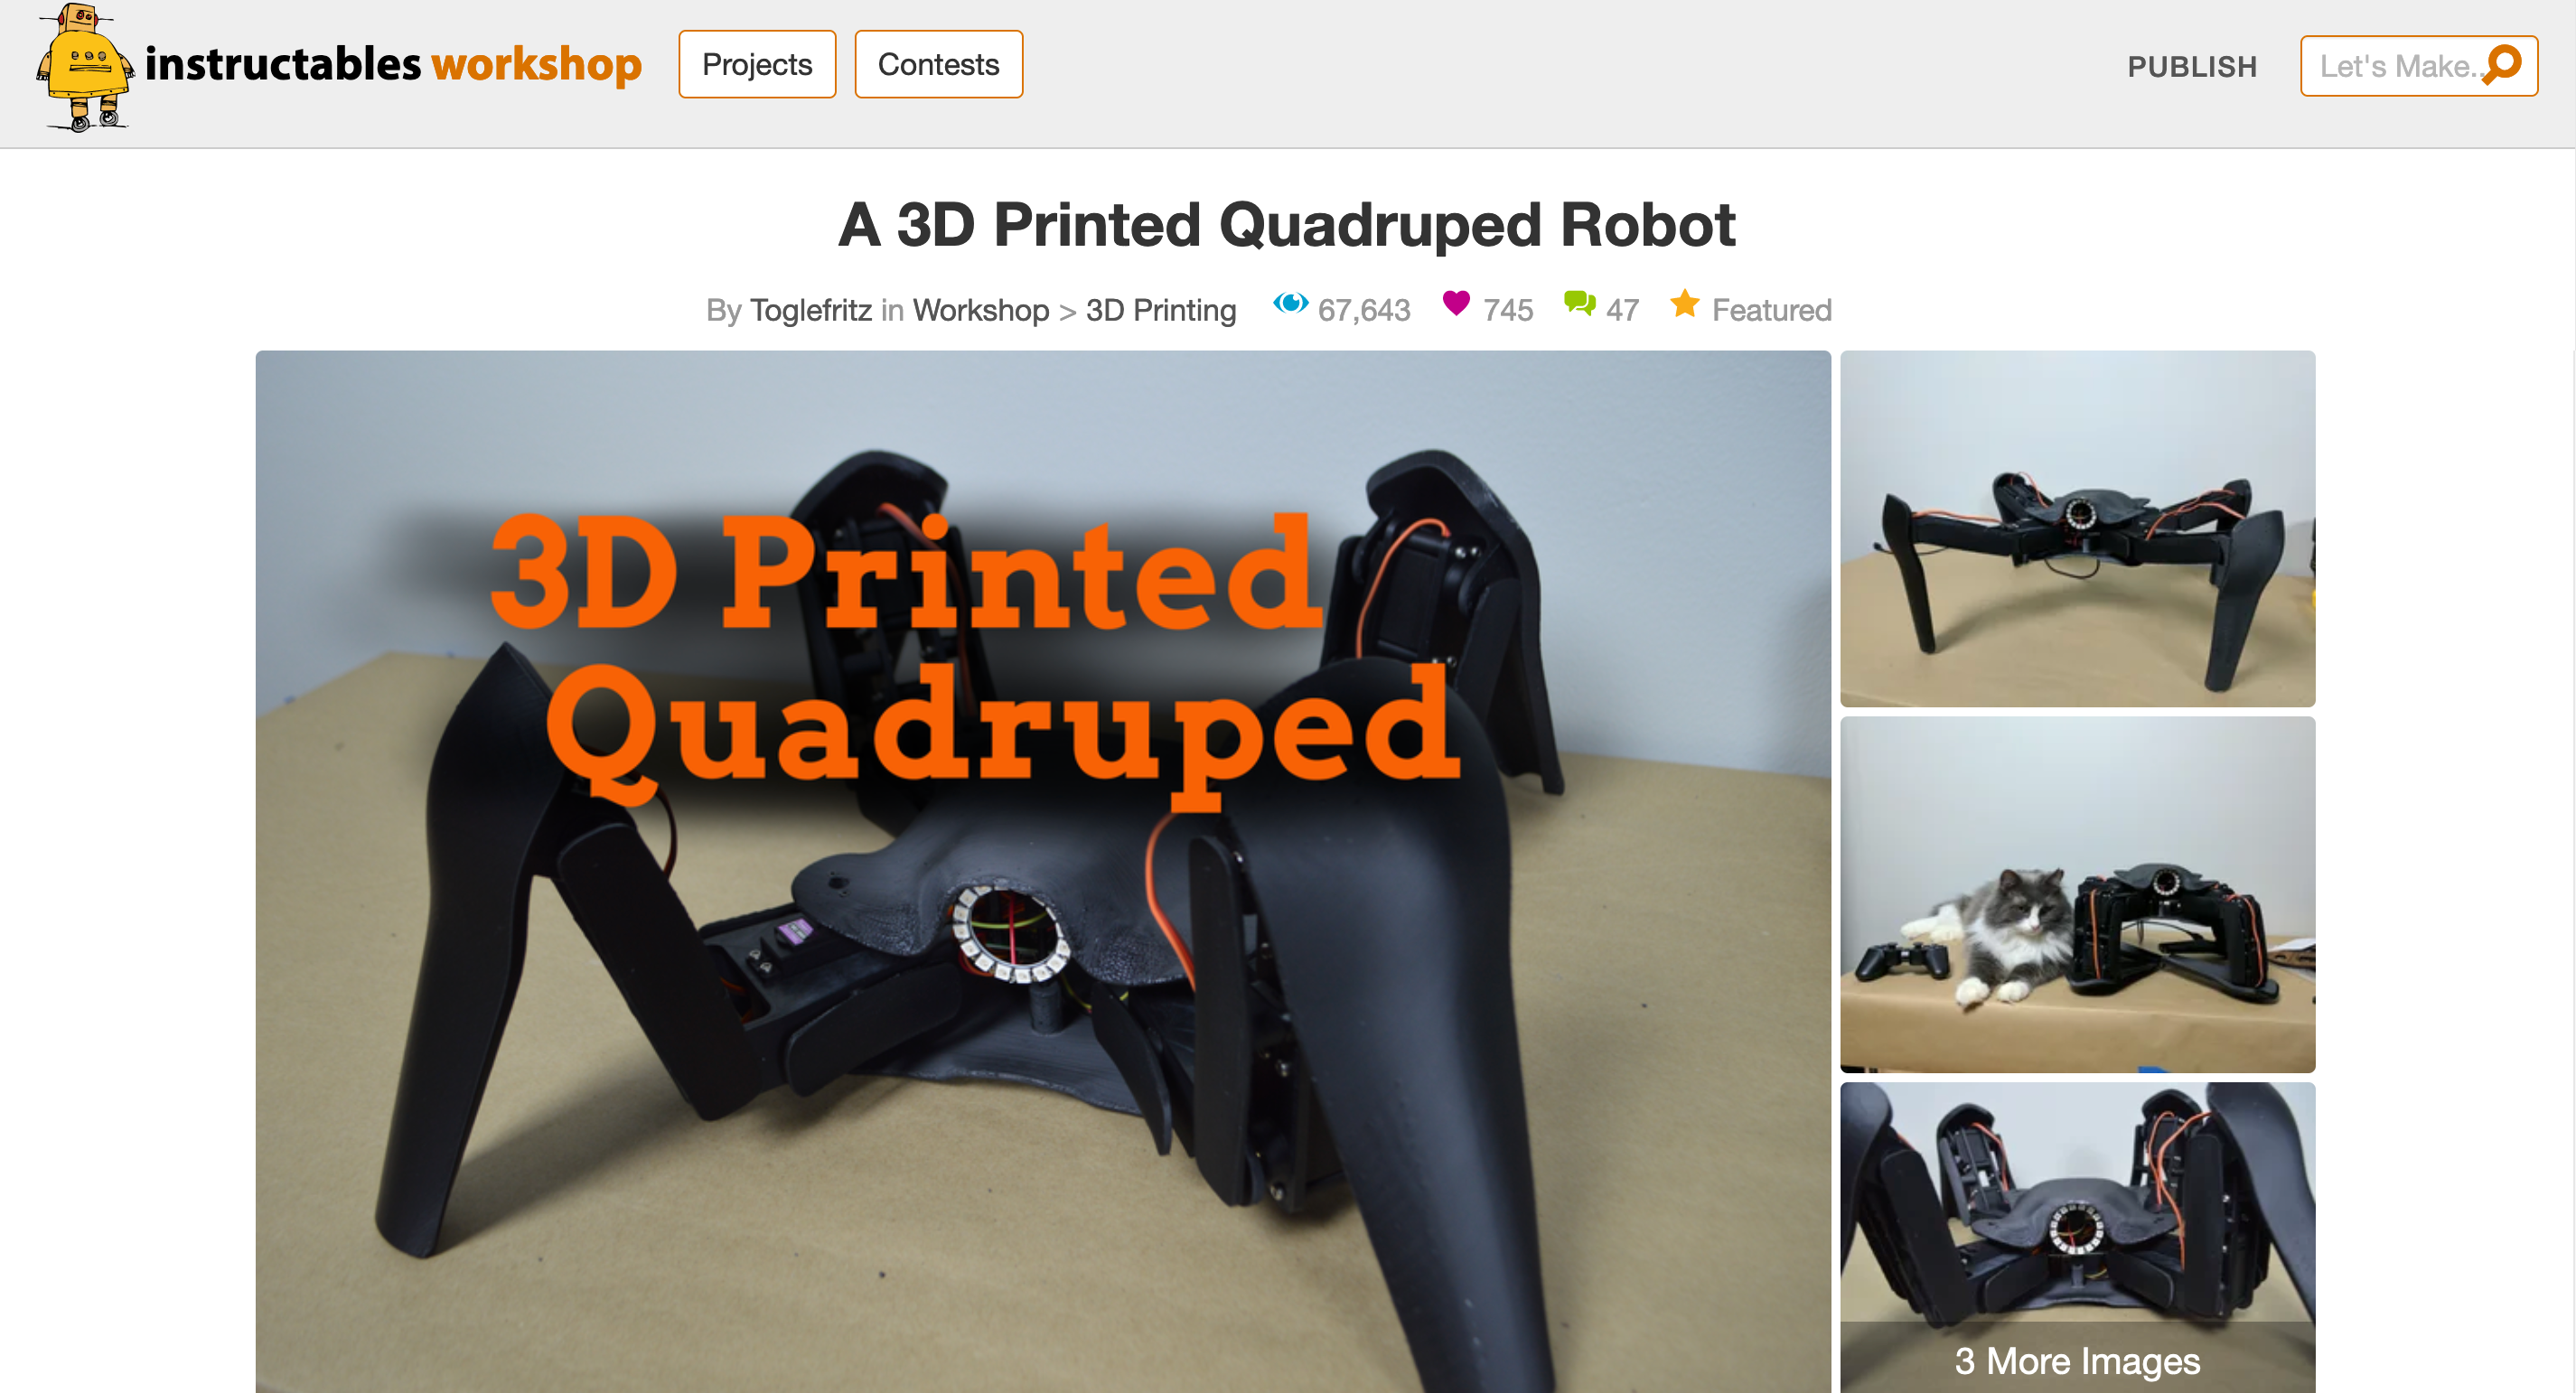 A screenshot of an Instructables page showing a four legged black robot